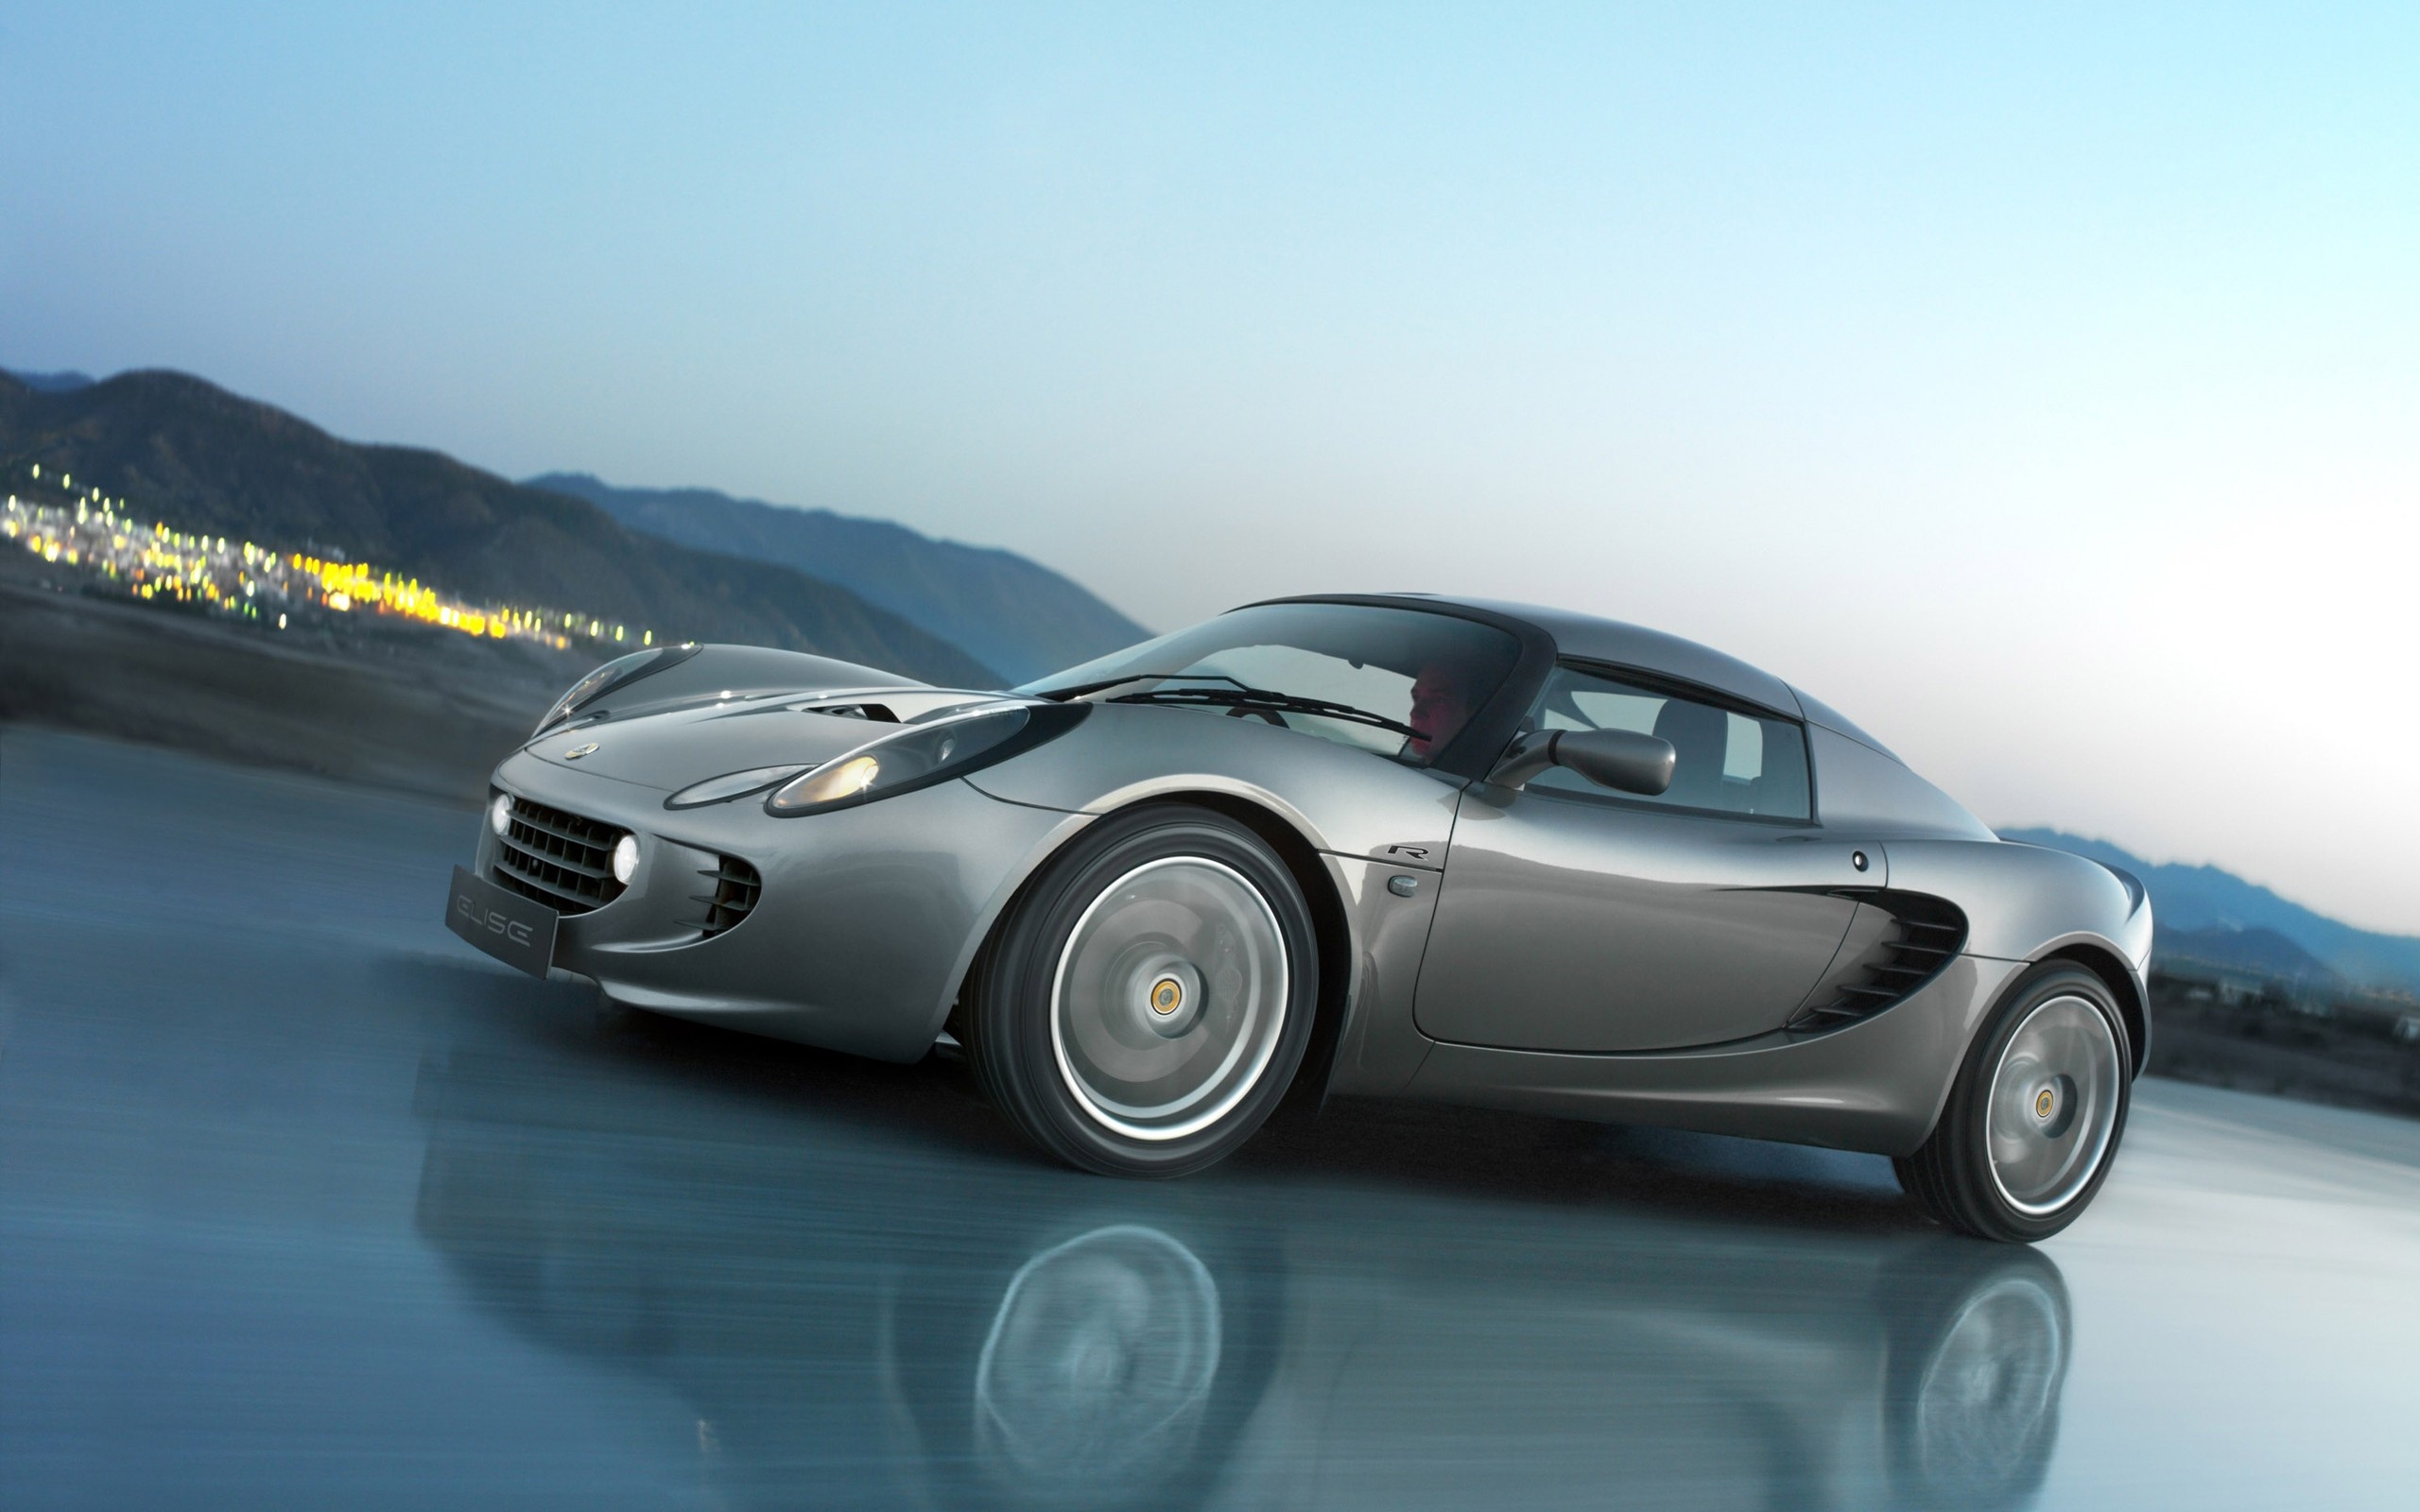 Lotus car, Stunning wallpapers, Automotive excellence, Unmatched performance, 2560x1600 HD Desktop